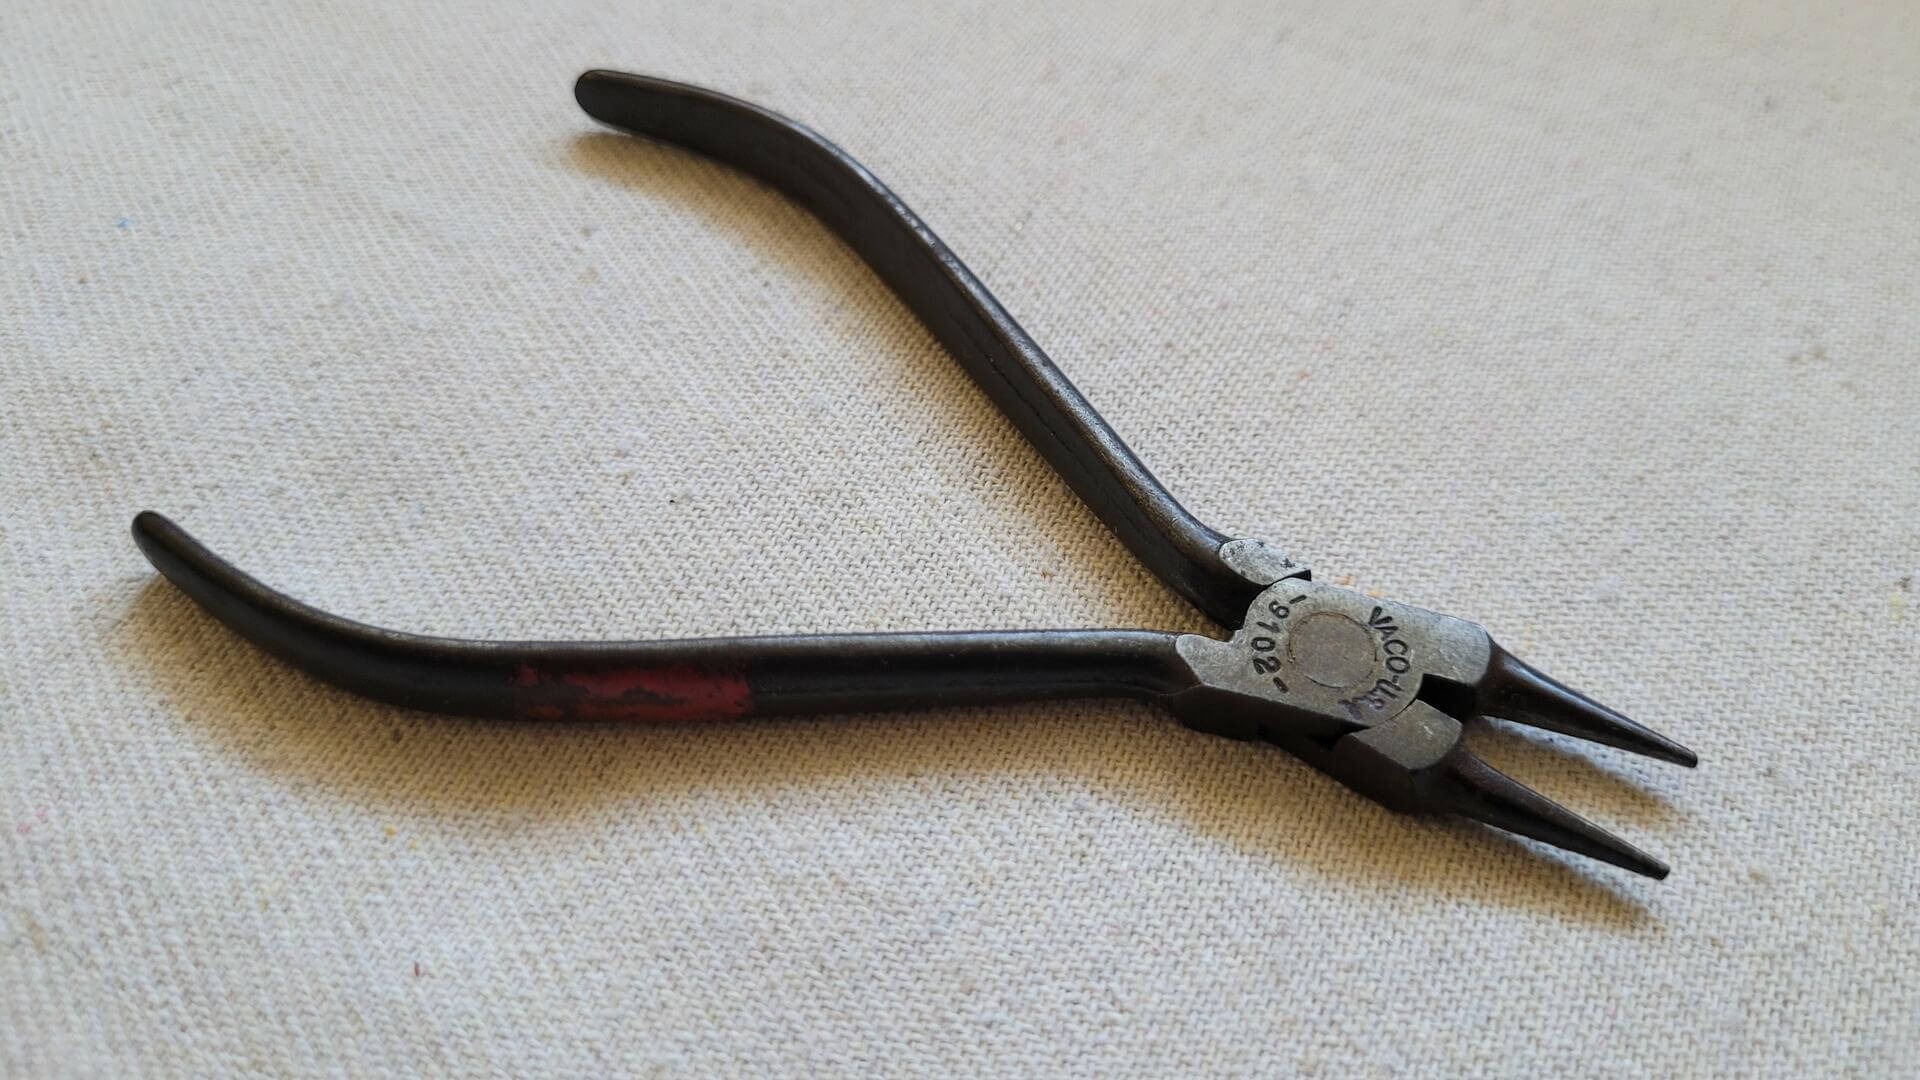 Rare vintage Vaco 9102, old Klein Tools brand round nose pliers 5 inches long. Antique made in USA collectible jewelry hand tools